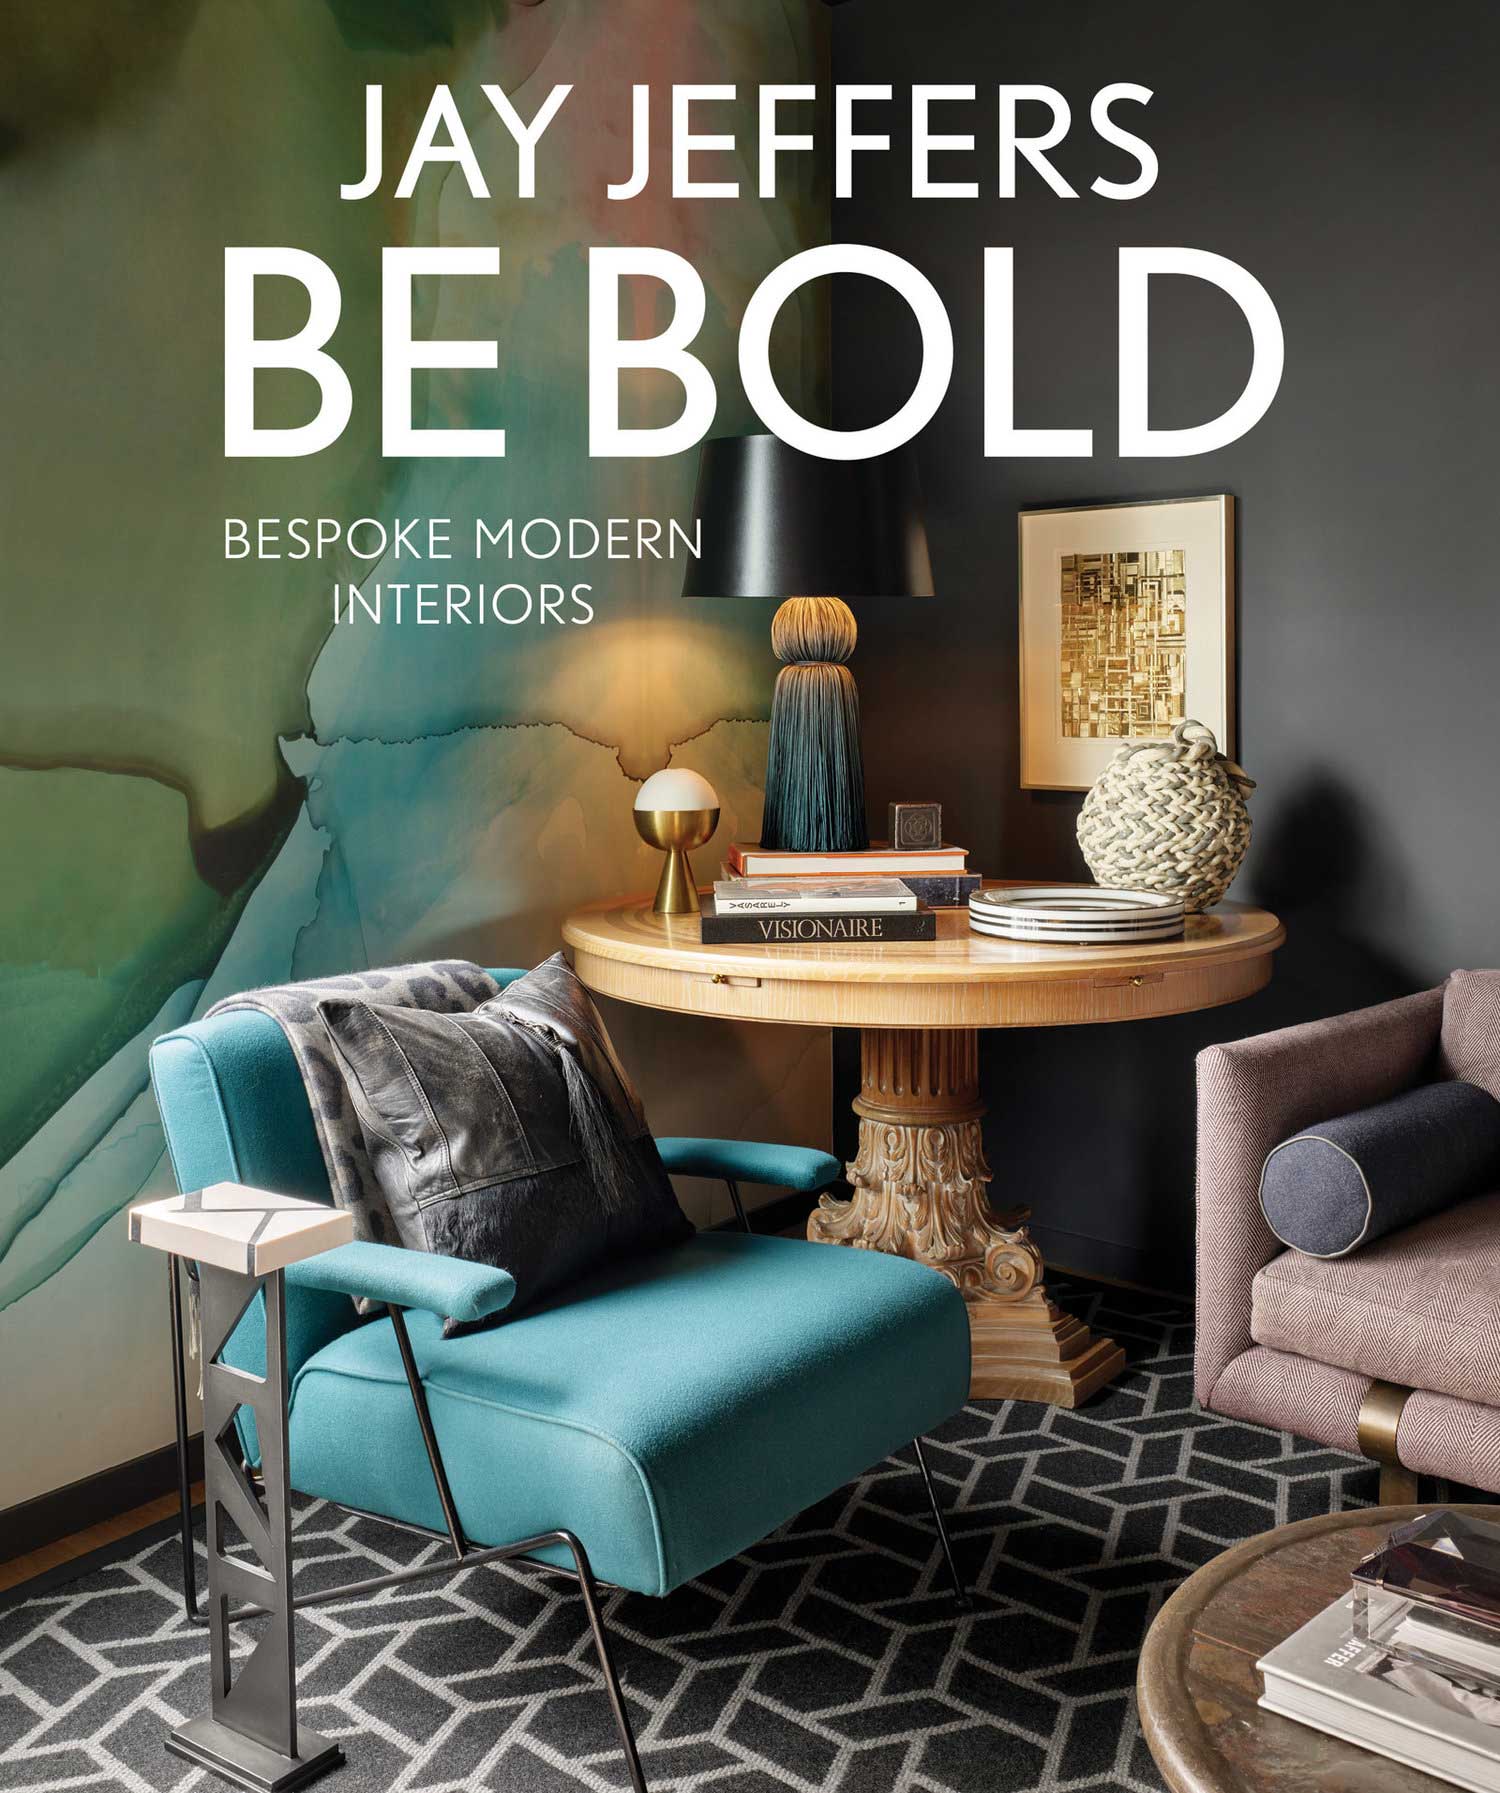 Be Bold book cover